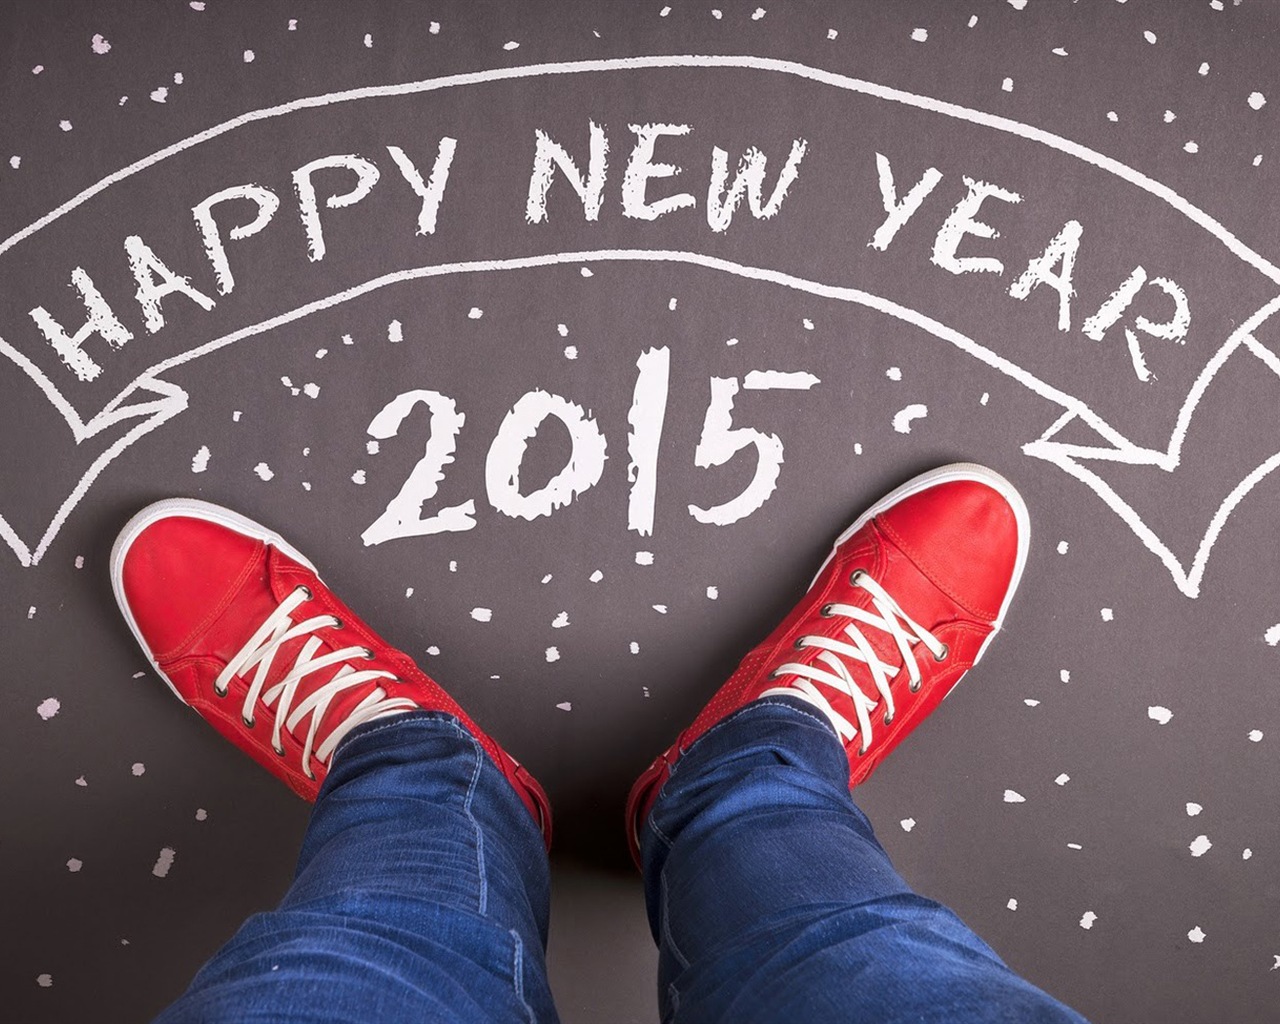 2015 New Year theme HD wallpapers (2) #15 - 1280x1024